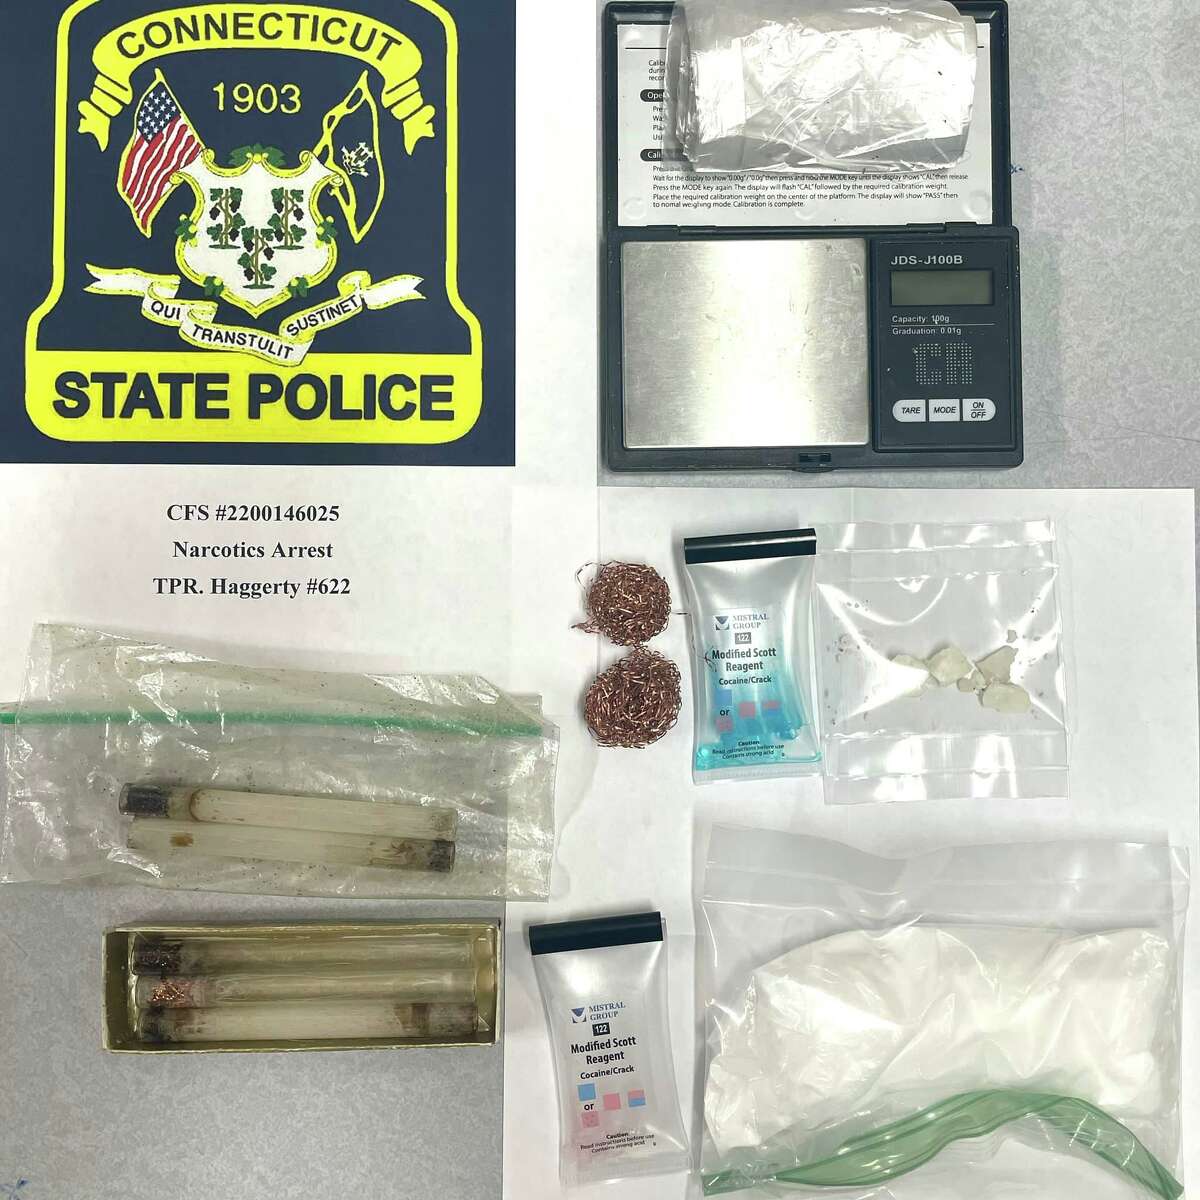 State police said troopers found about three ounces of crack cocaine, pipes and other items used to sell illegal narcotics during a search of a vehicle near a Griswold, Conn., park on Monday, April 5, 2022.